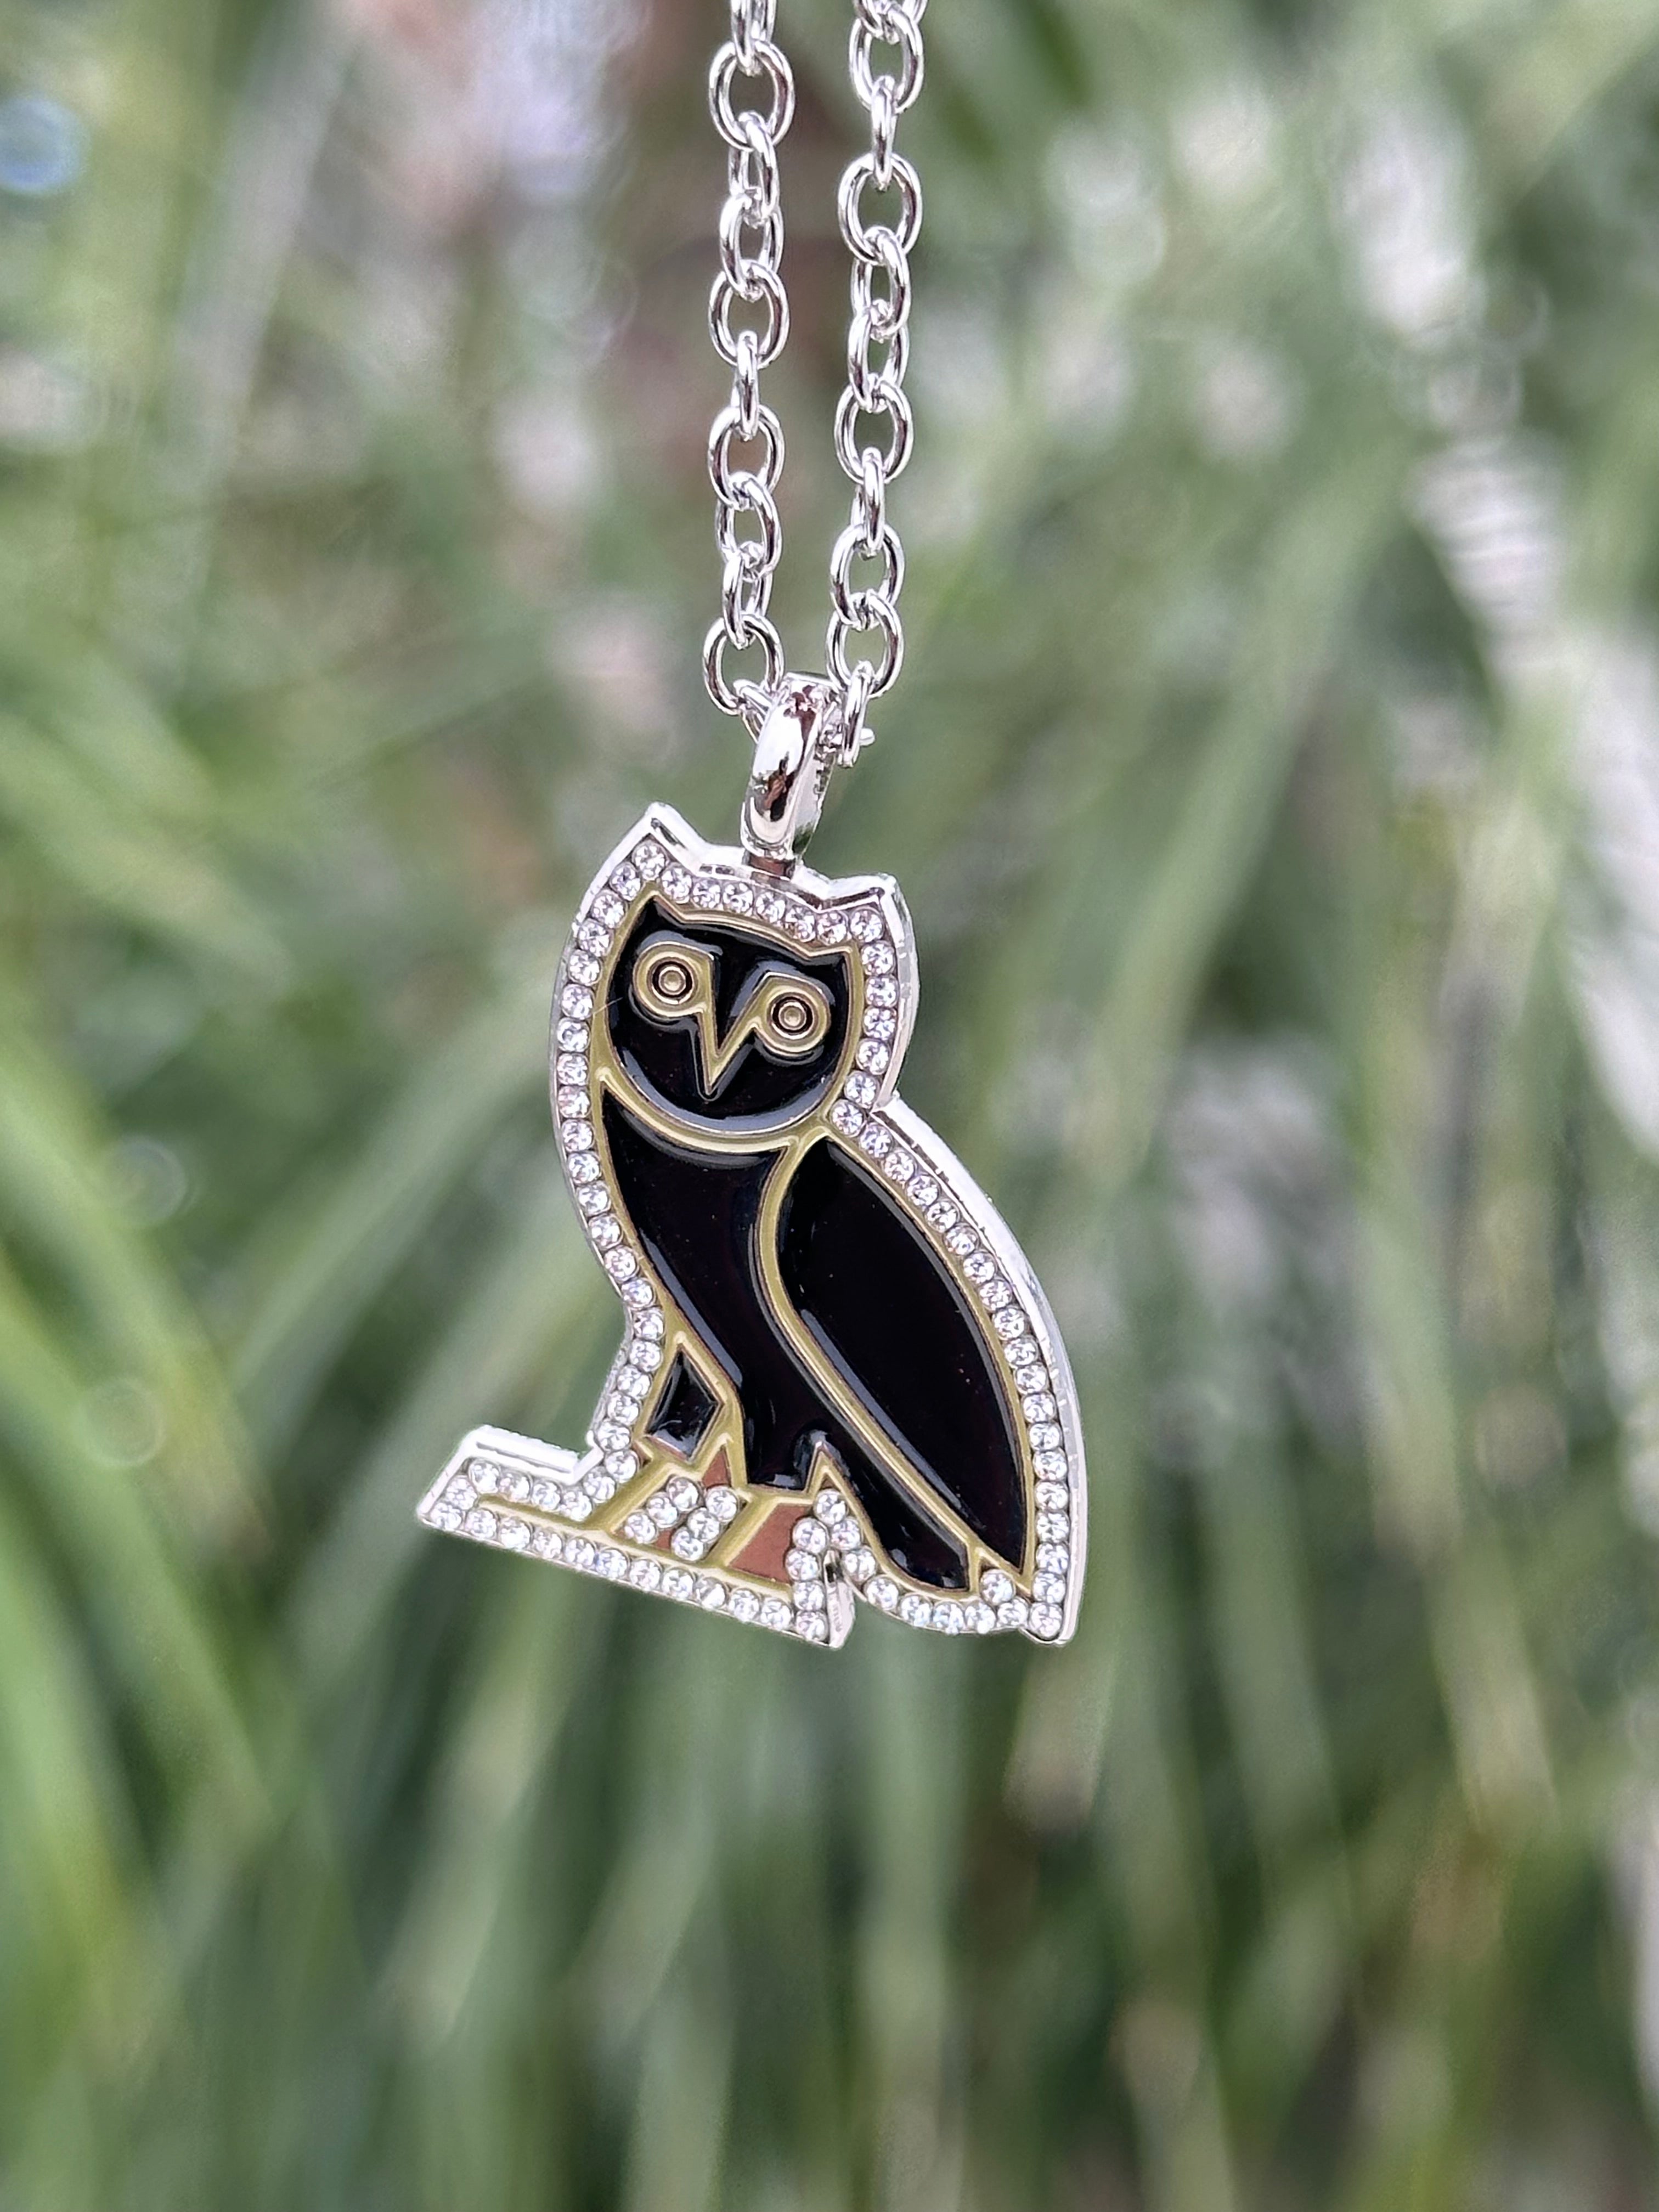 *NEW SILVER "THE OWL" ICED OUT CHAIN VERY LIMITED